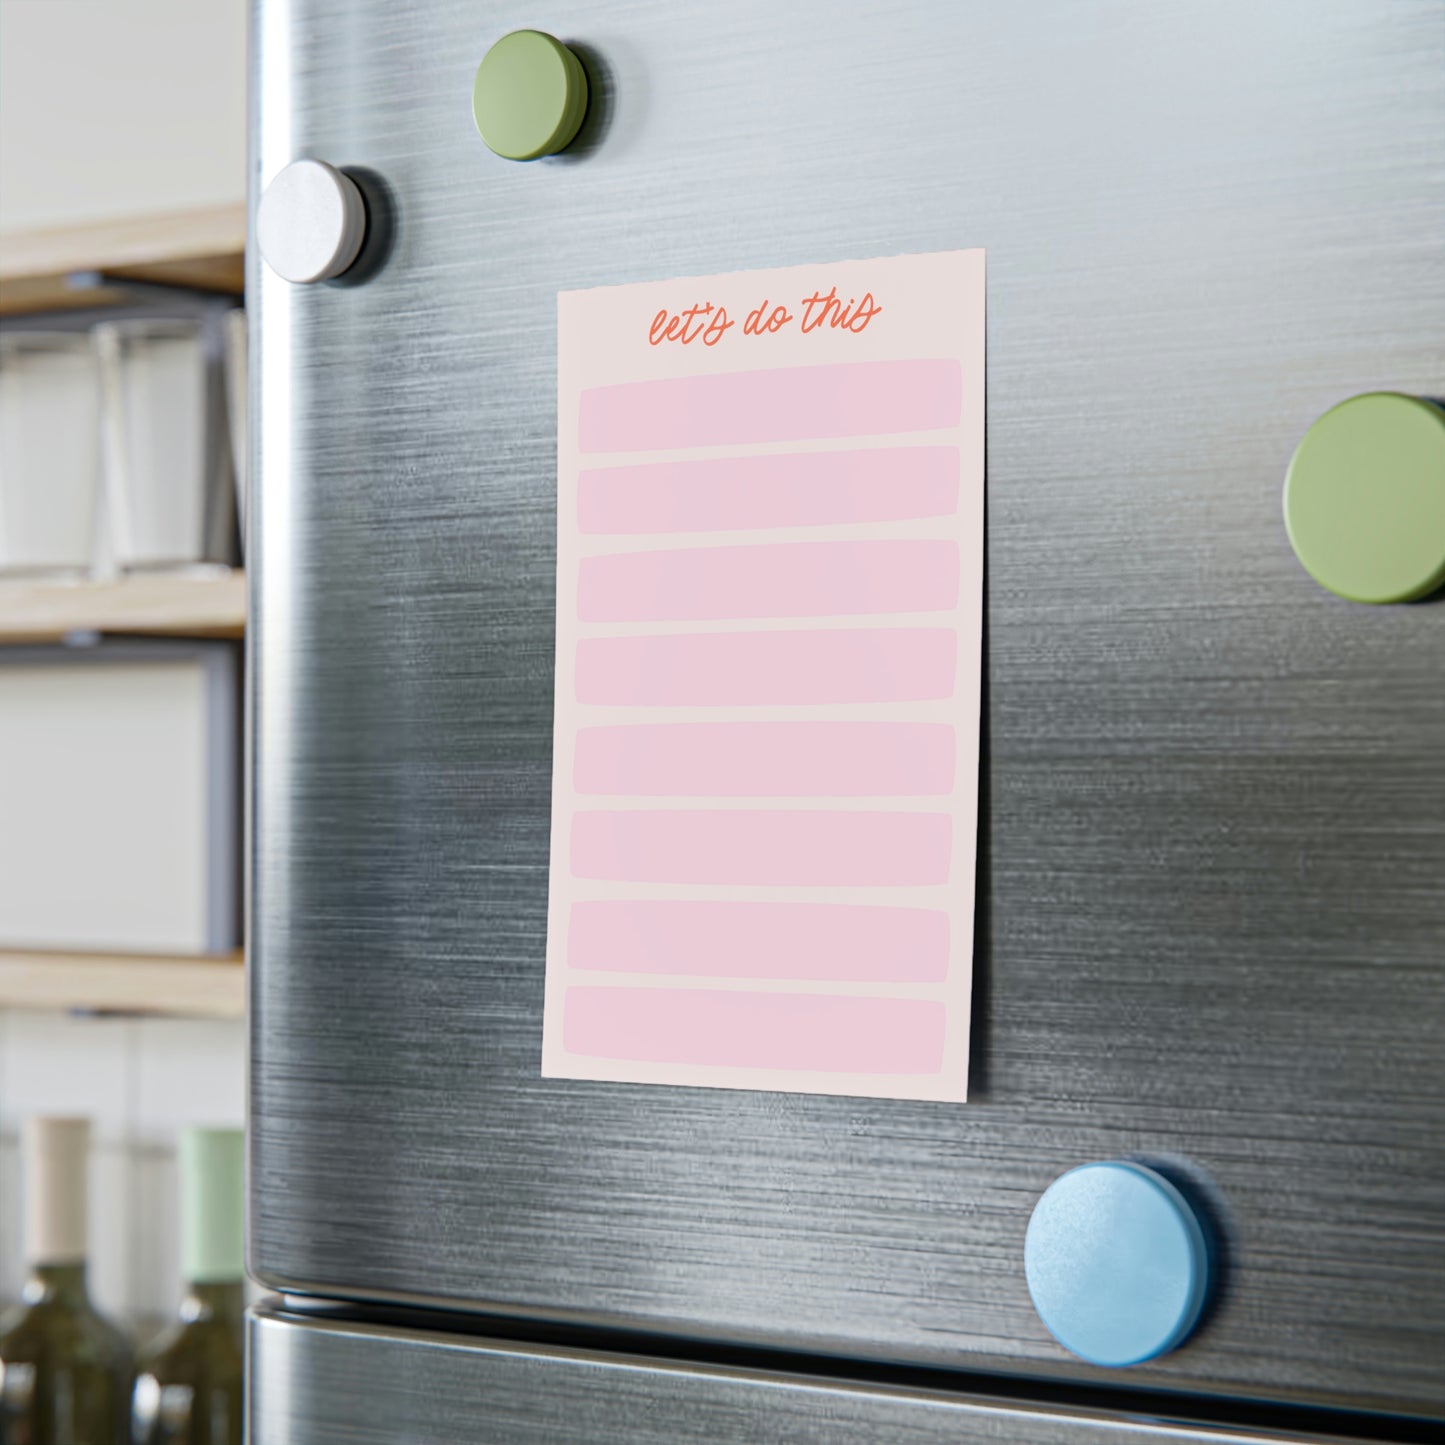 To-Do List Post-it® Note Pad 4 x 6